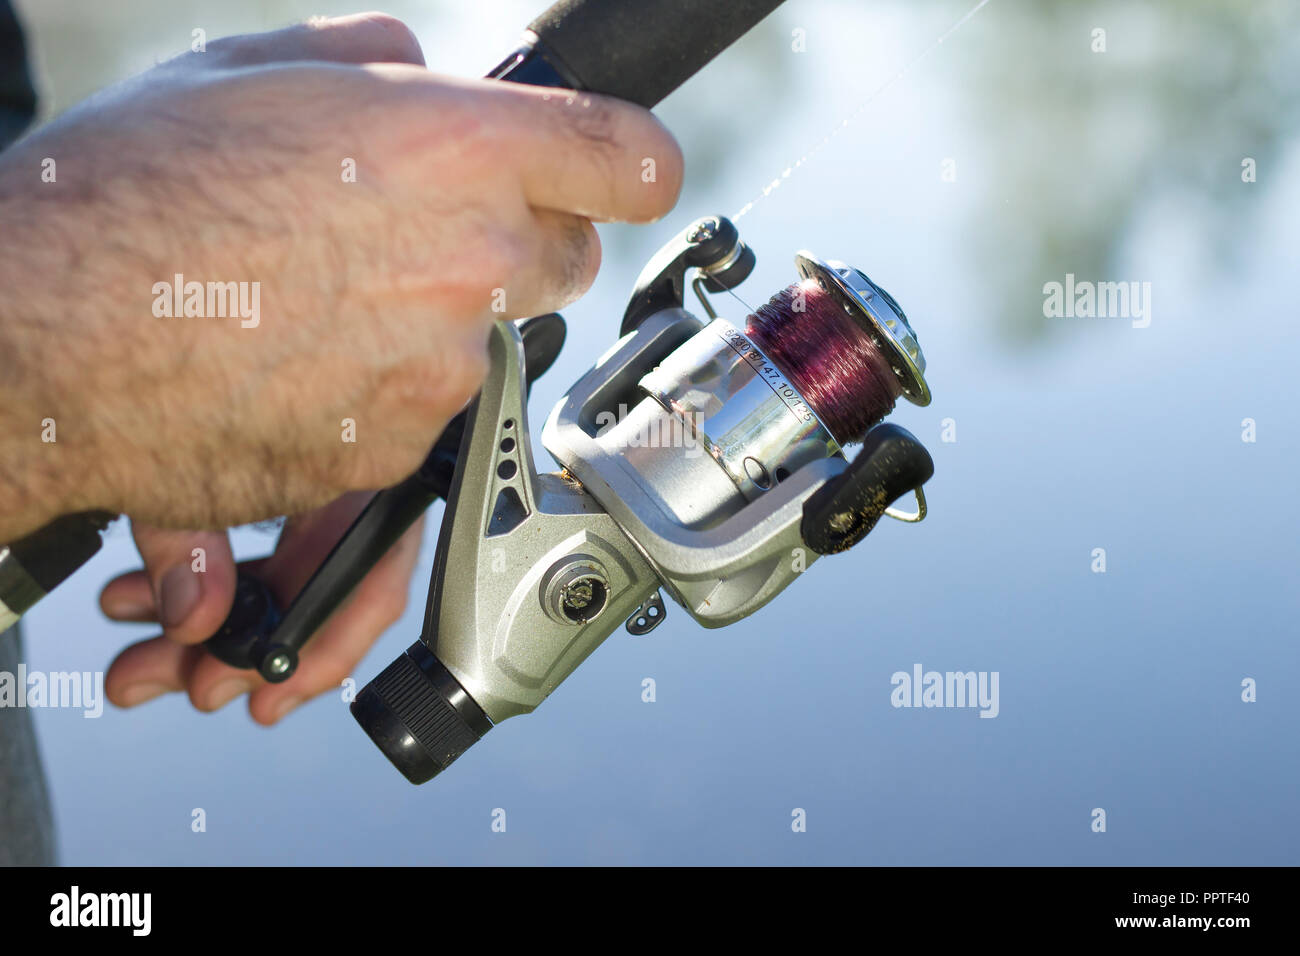 https://c8.alamy.com/comp/PPTF40/angler-catches-fish-for-spinning-pulls-the-fishing-line-with-a-spinning-wheel-PPTF40.jpg